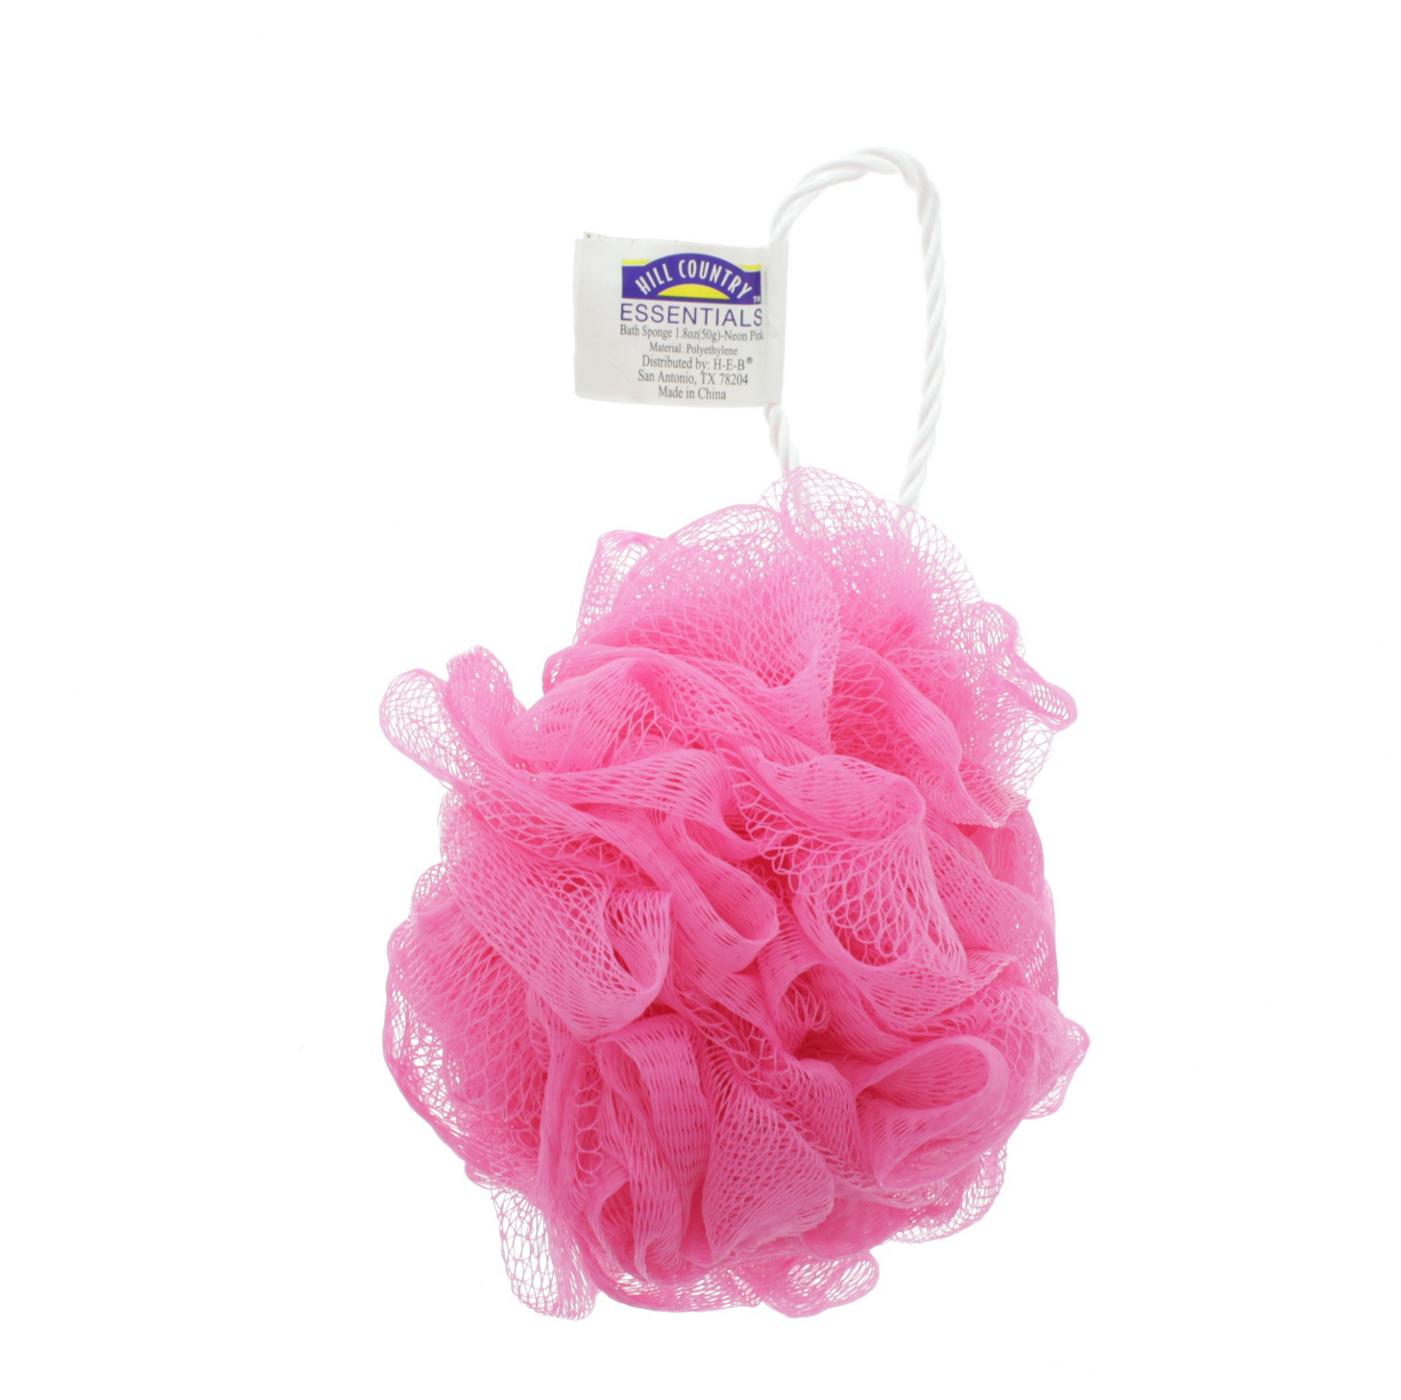 Hill Country Essentials Mesh Bath Sponge - Colors May Vary; image 4 of 4